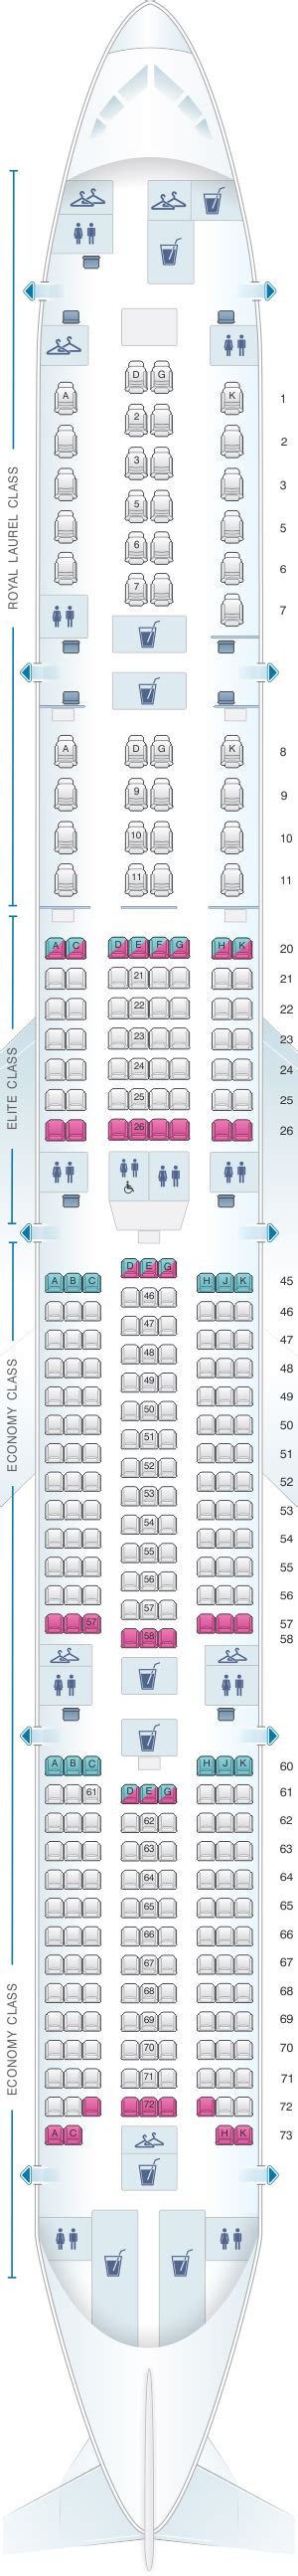 Entertainment System Seating details Find the best seat wiht our EVA Air Boeing 777-300ER (77W) v1 seating chart. Use this seat map to get the most comfortable seats, legroom and recline before booking.. 